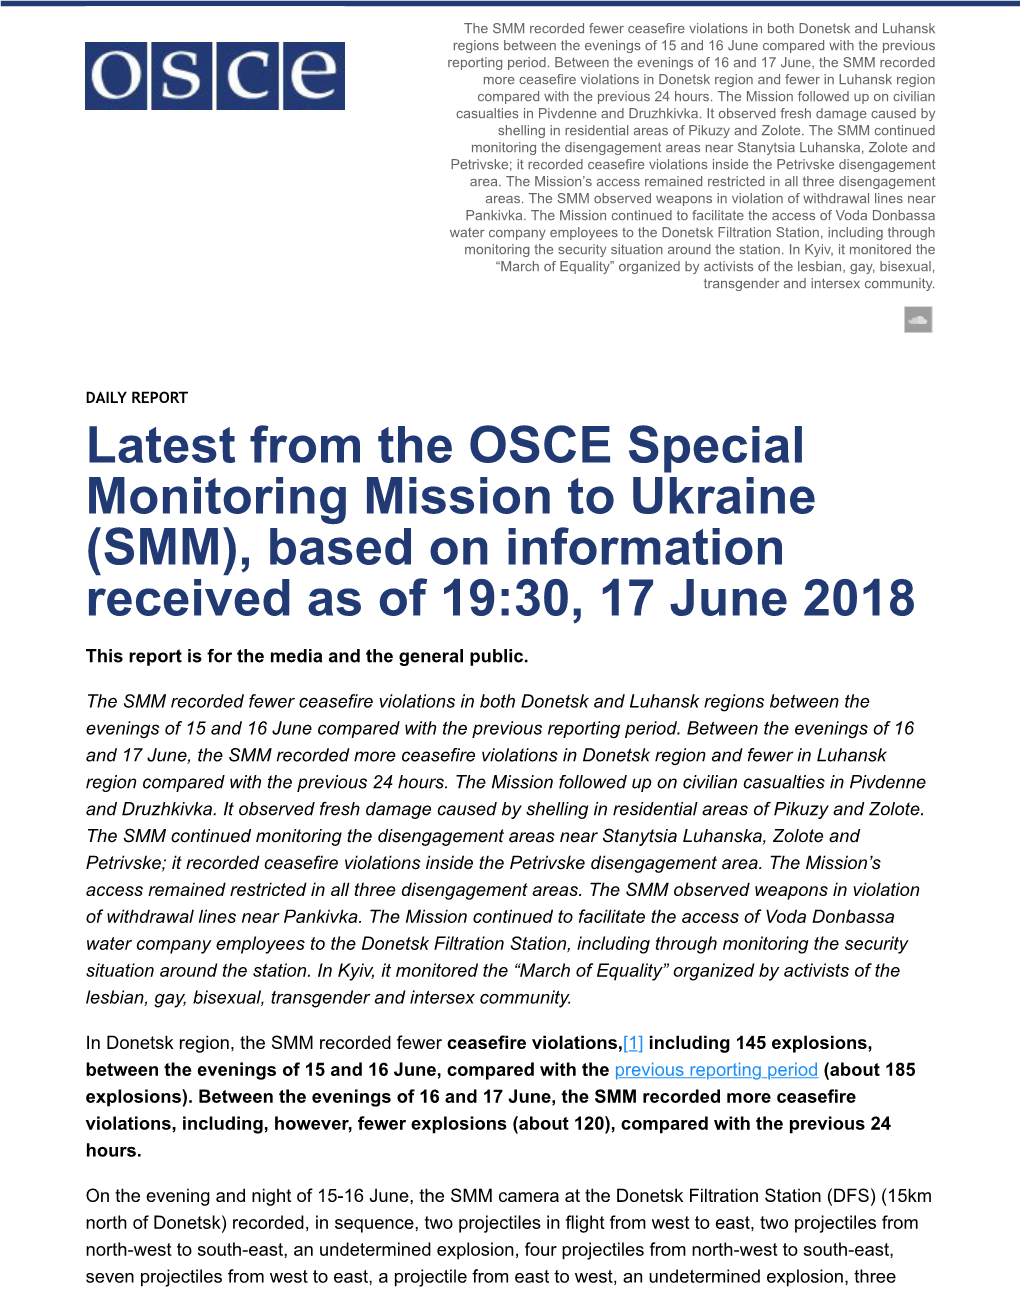 Latest from the OSCE Special Monitoring Mission to Ukraine (SMM), Based on Information Received As of 19:30, 17 June 2018